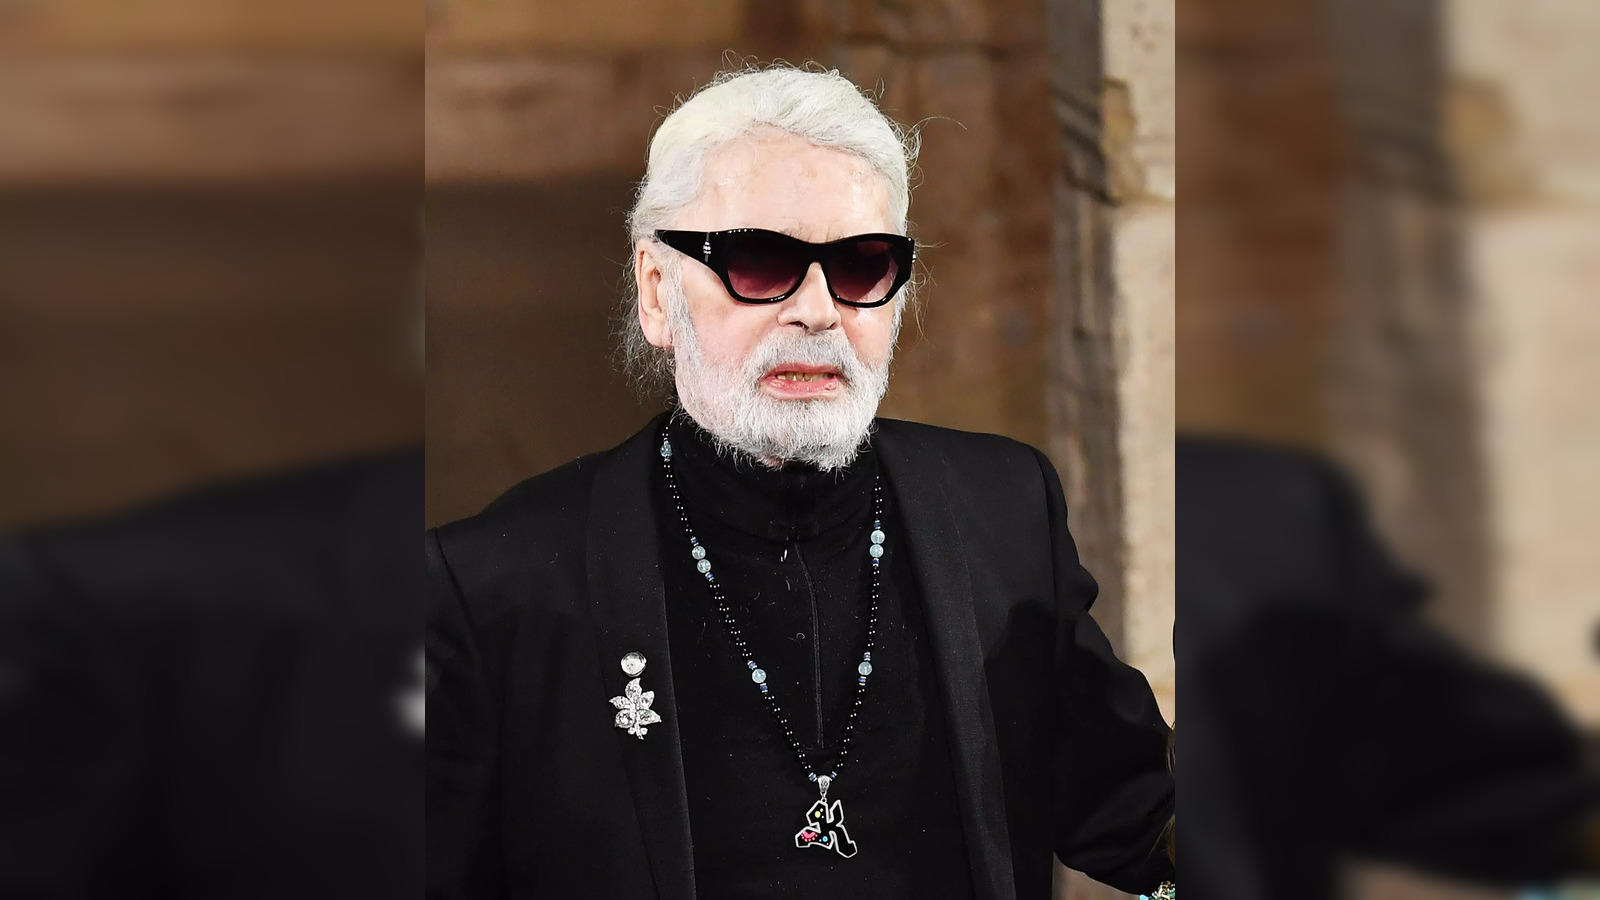 The Met's Next Costume Institute Show and Gala Will Pay Homage to Karl  Lagerfeld, the 'Hitchcock of Fashion